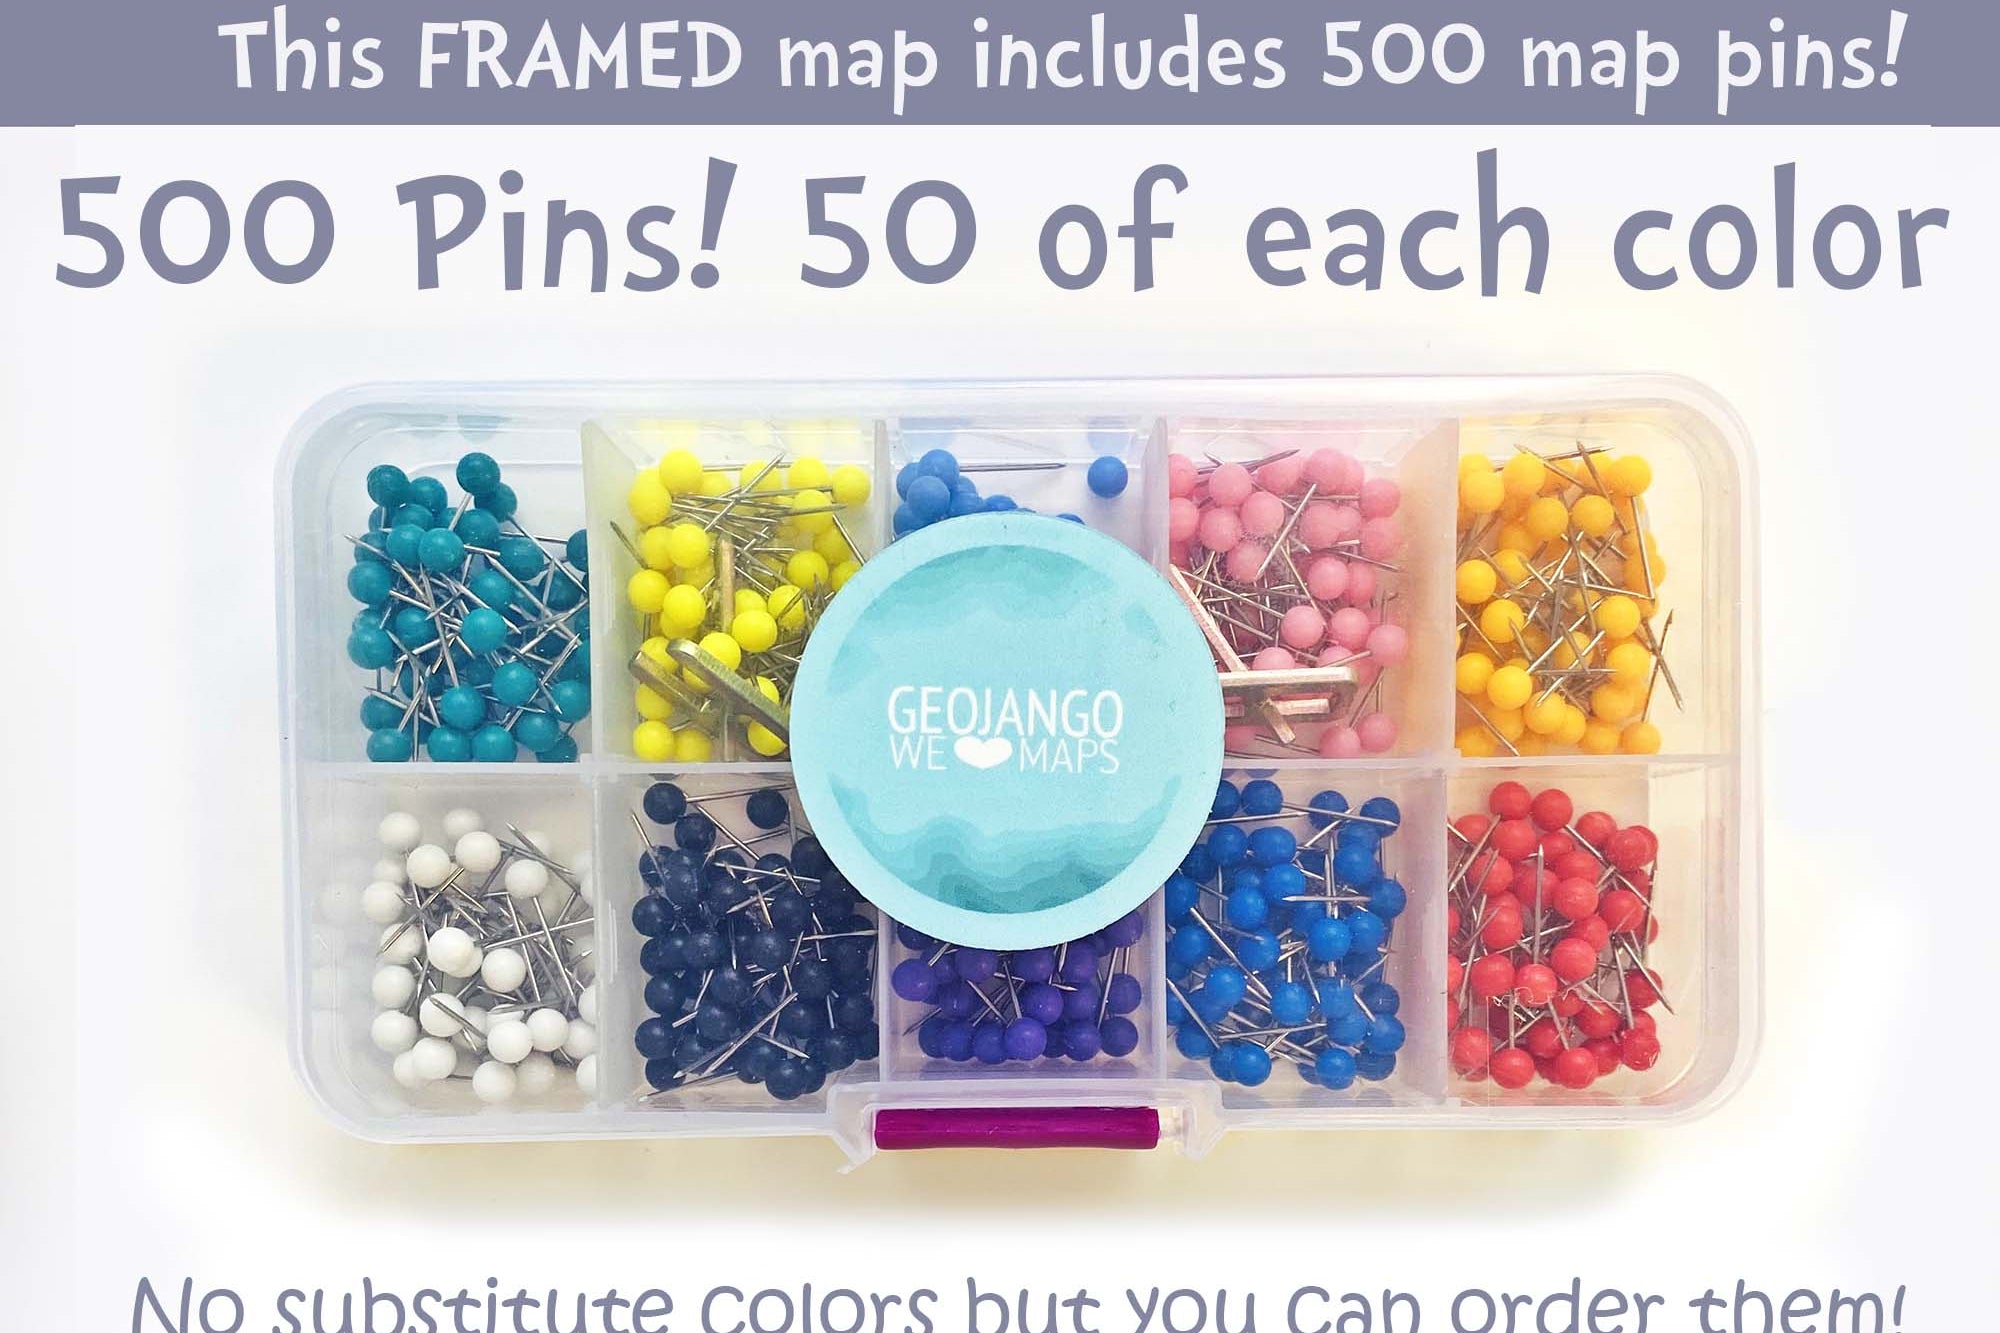 Pushpins included with pin maps